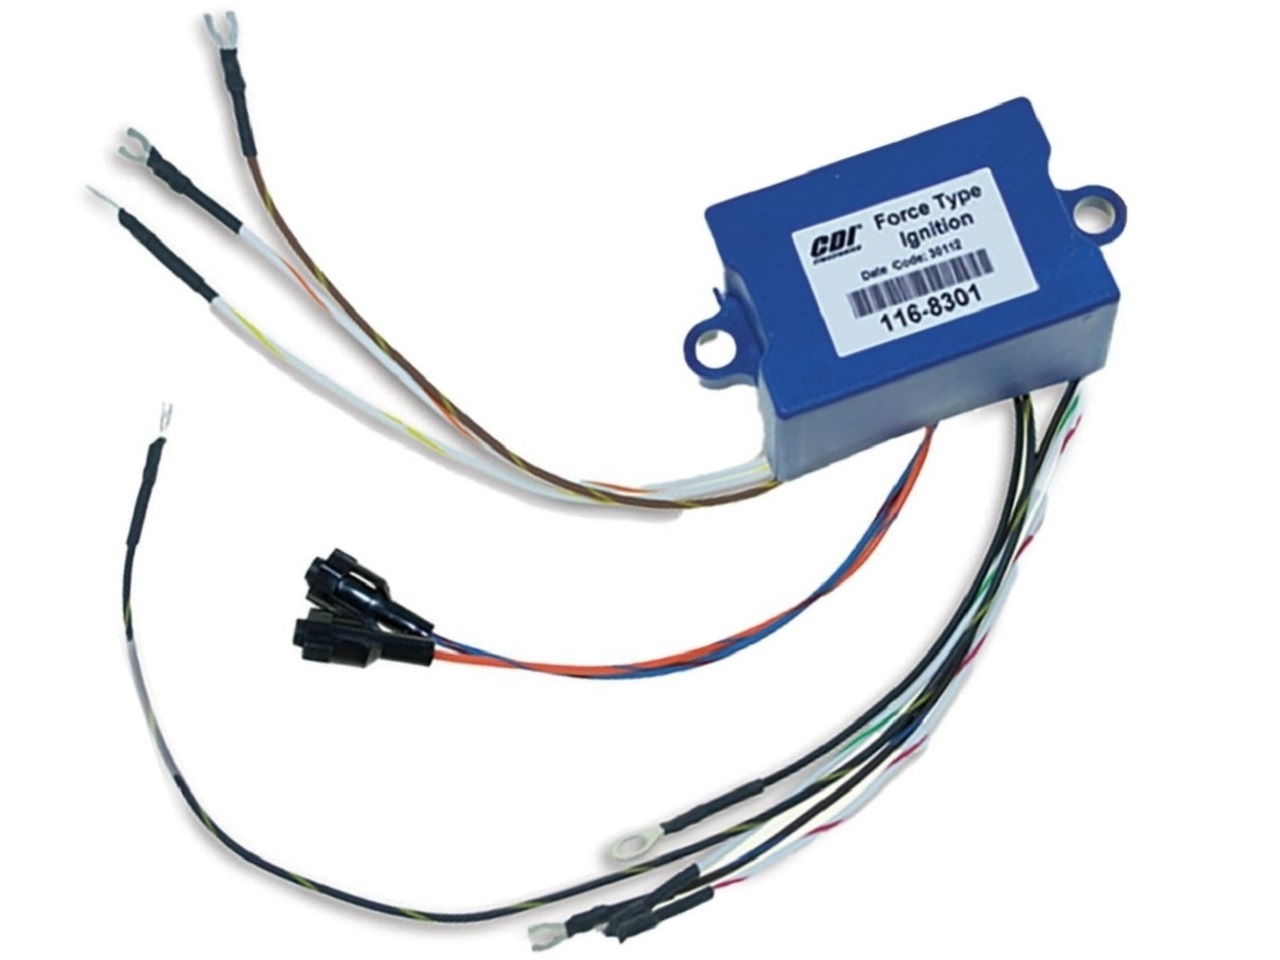 Mercury Outboard Force type Ignition 2, 3, 4, 5 Cylinder igniter ignition module CDI Box (116-8301)